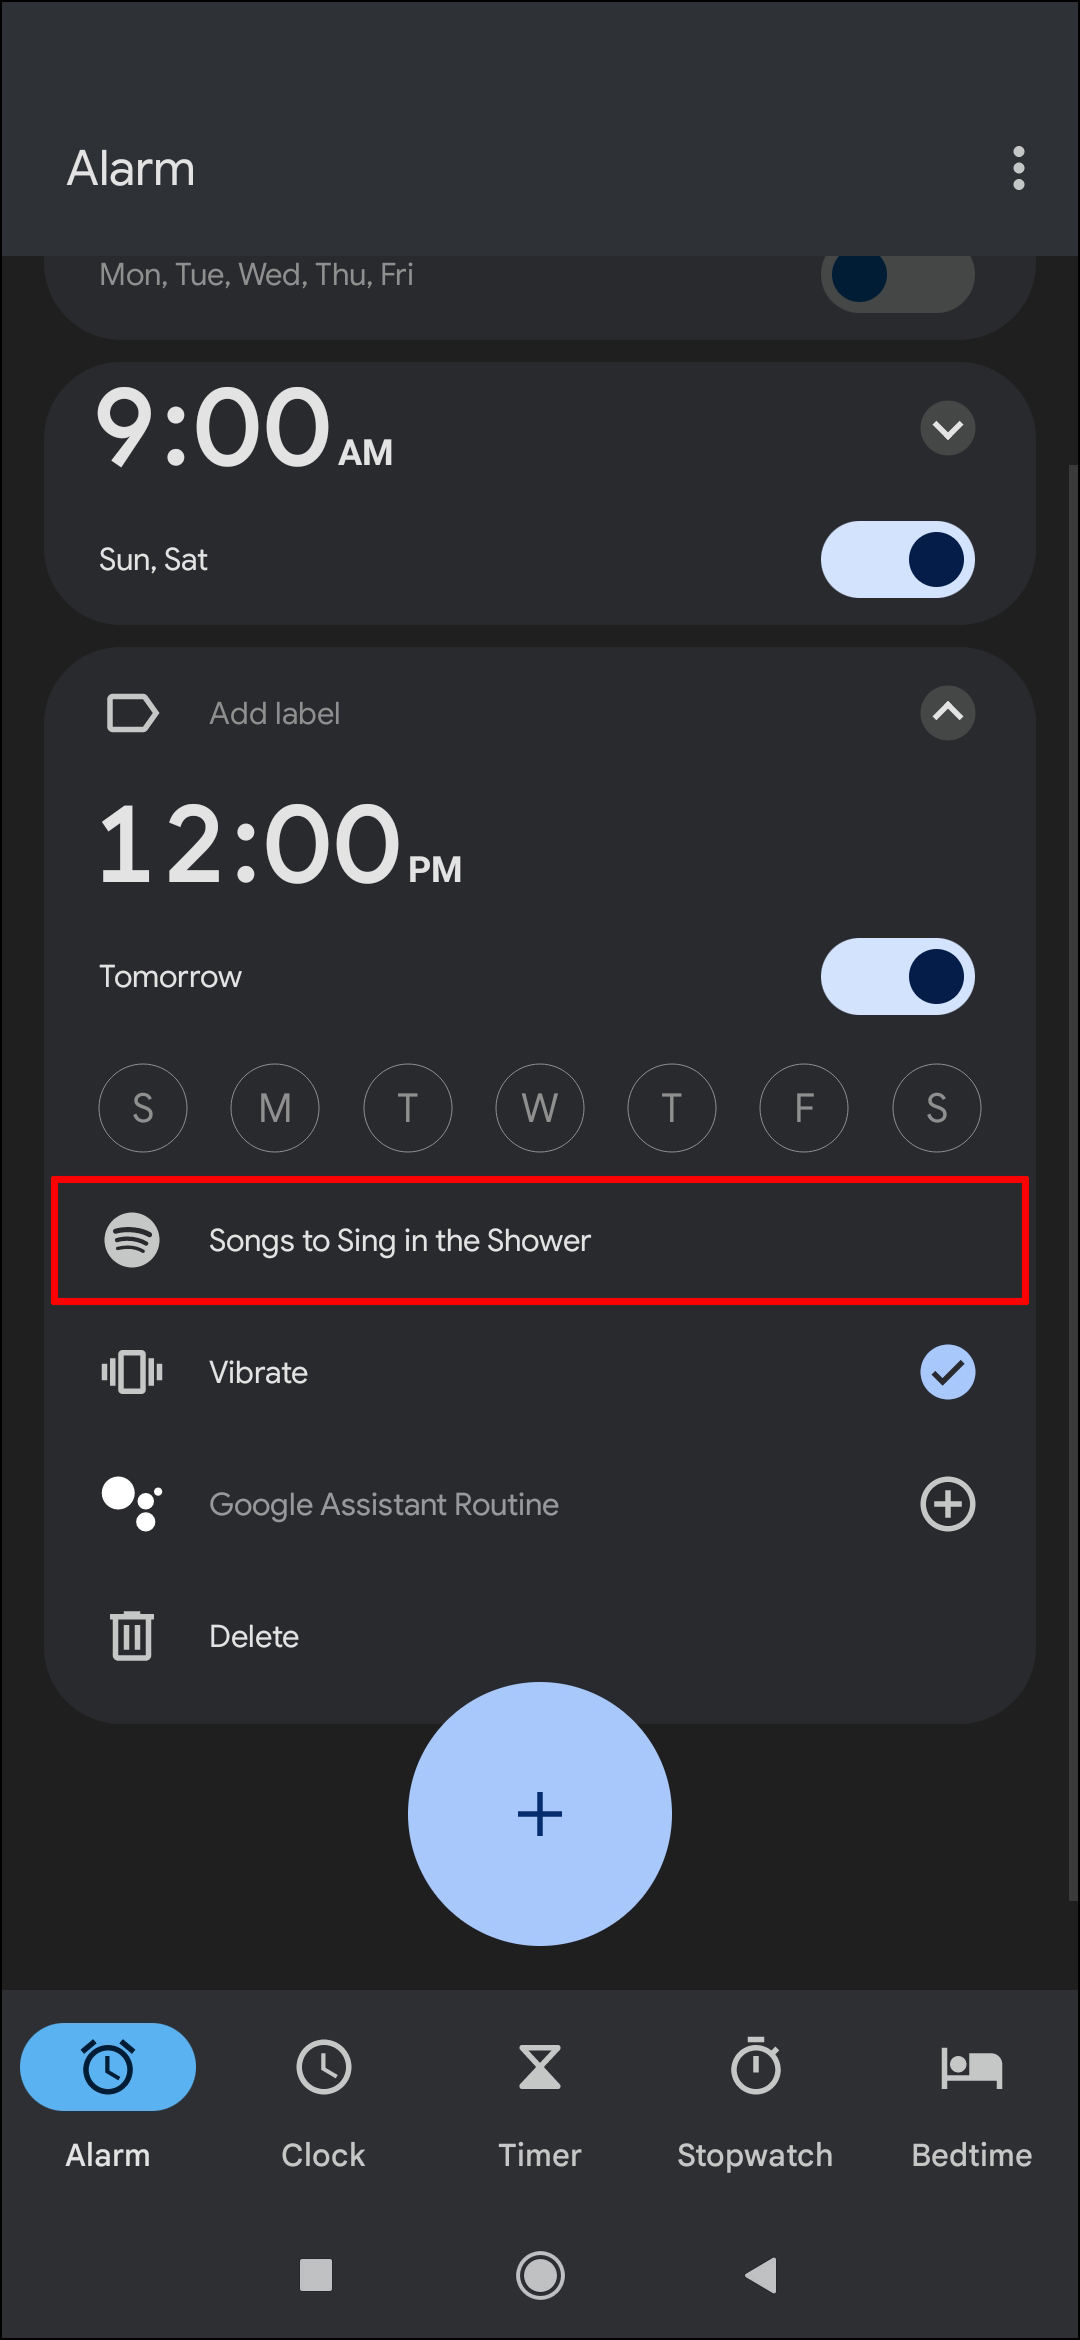 træ porcelæn dommer How to Set a Song as an Alarm on an Android Device